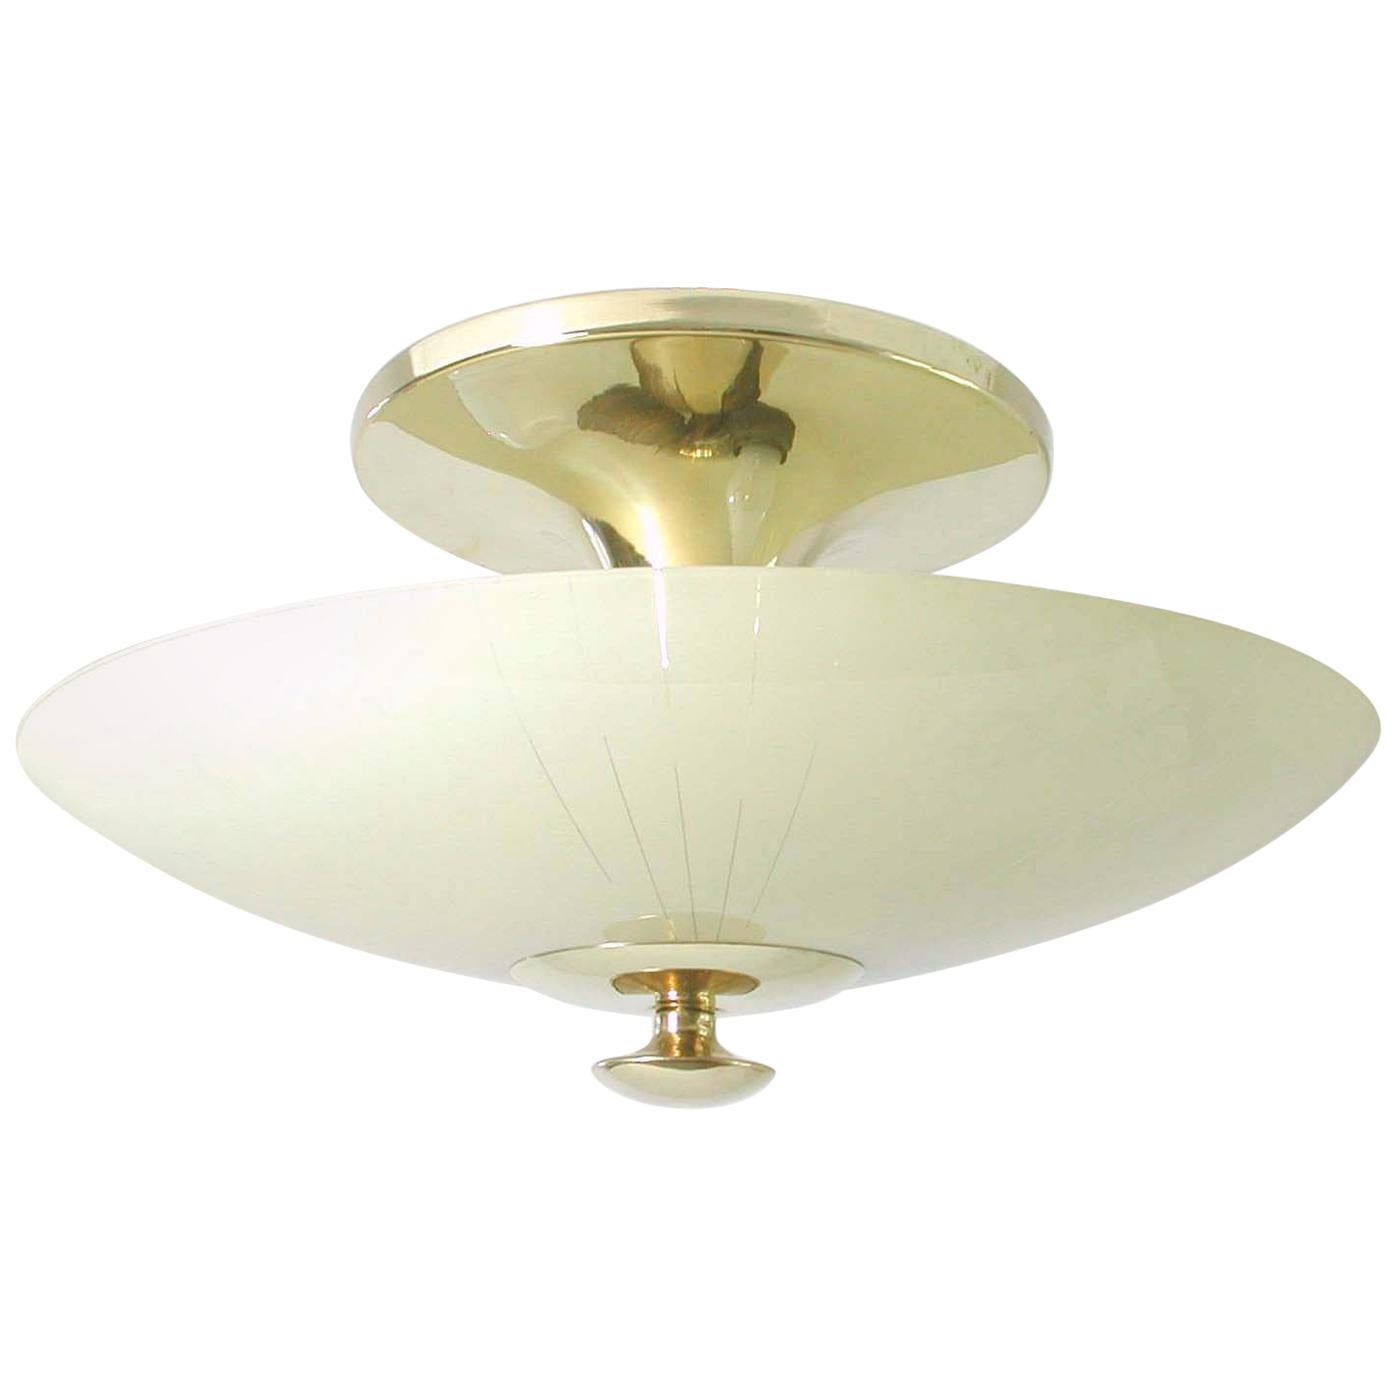 Midcentury German Opaline and Brass Flush Mount, 1950s For Sale